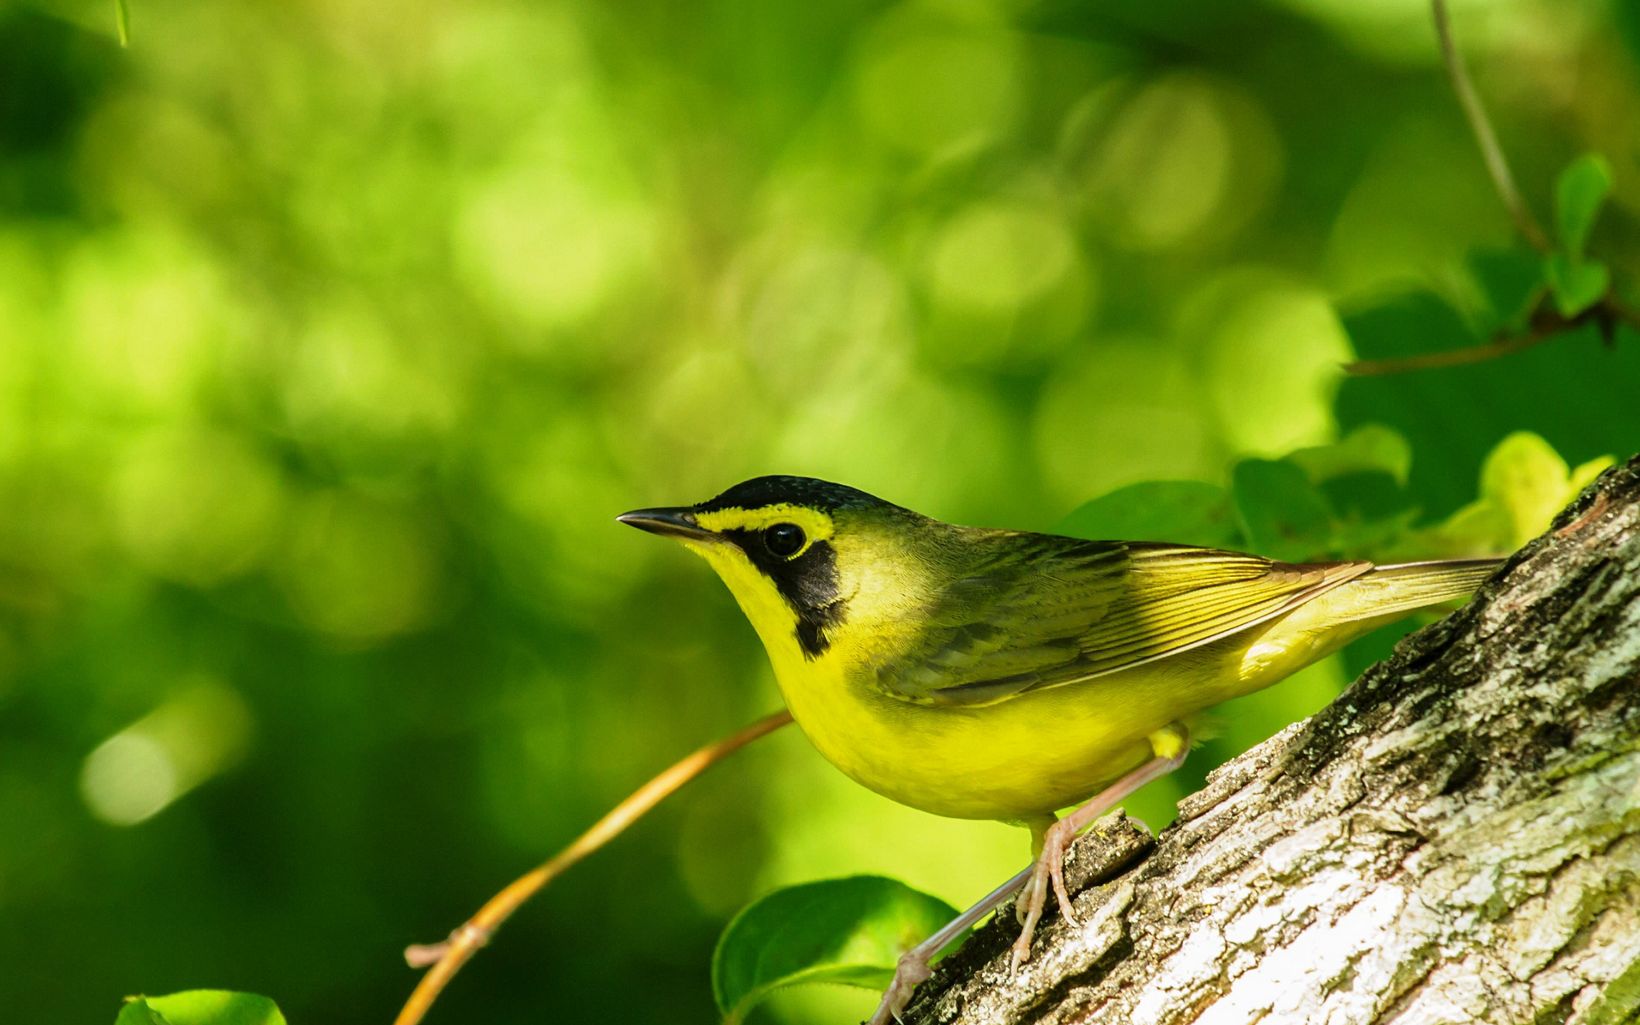 A yellow and black bird rests on a branch.